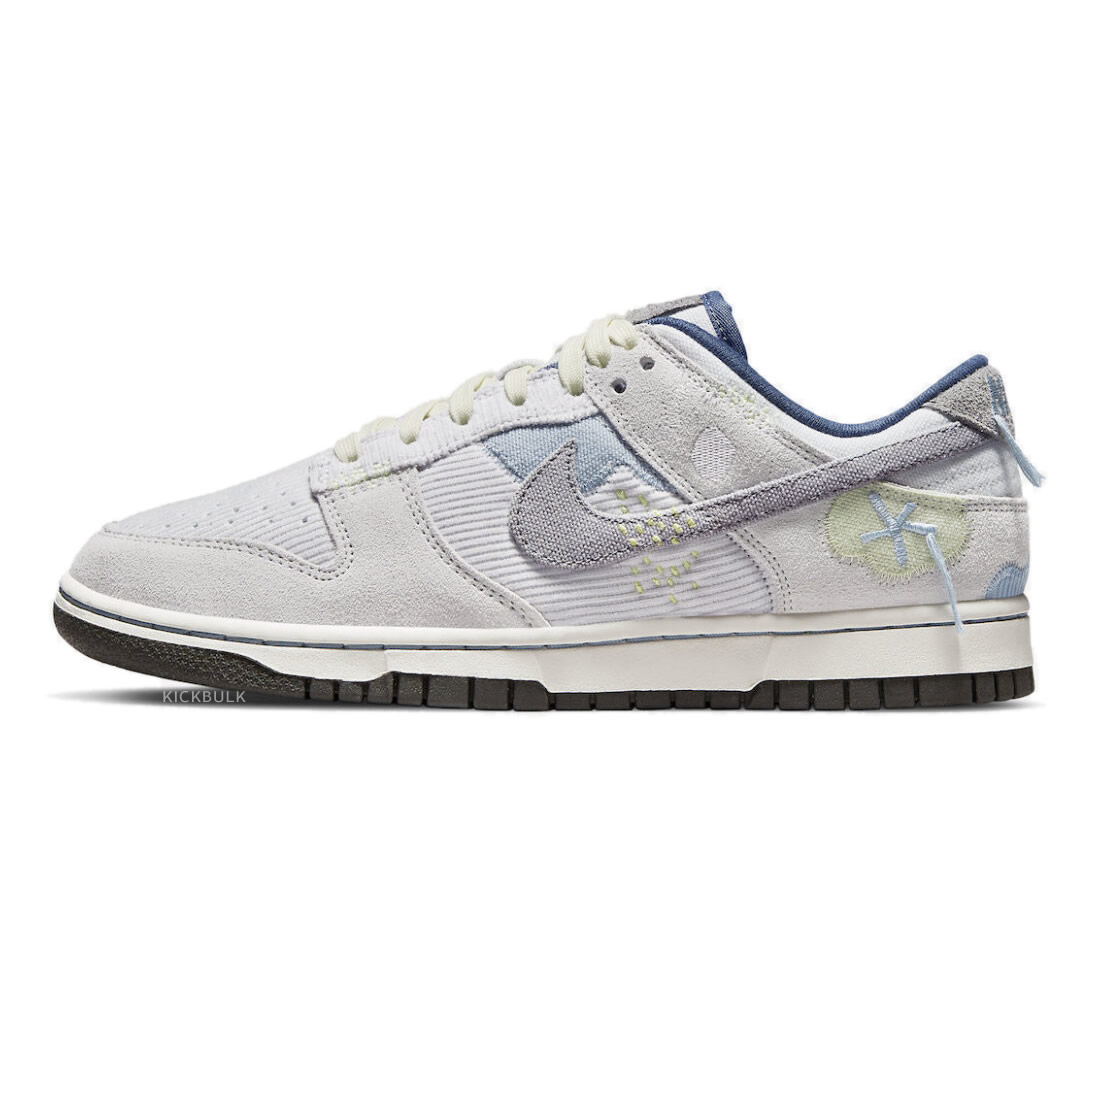 Nike Dunk Low On The Bright Side Photon Dust Wmns Dq5076 001 1 - www.kickbulk.co